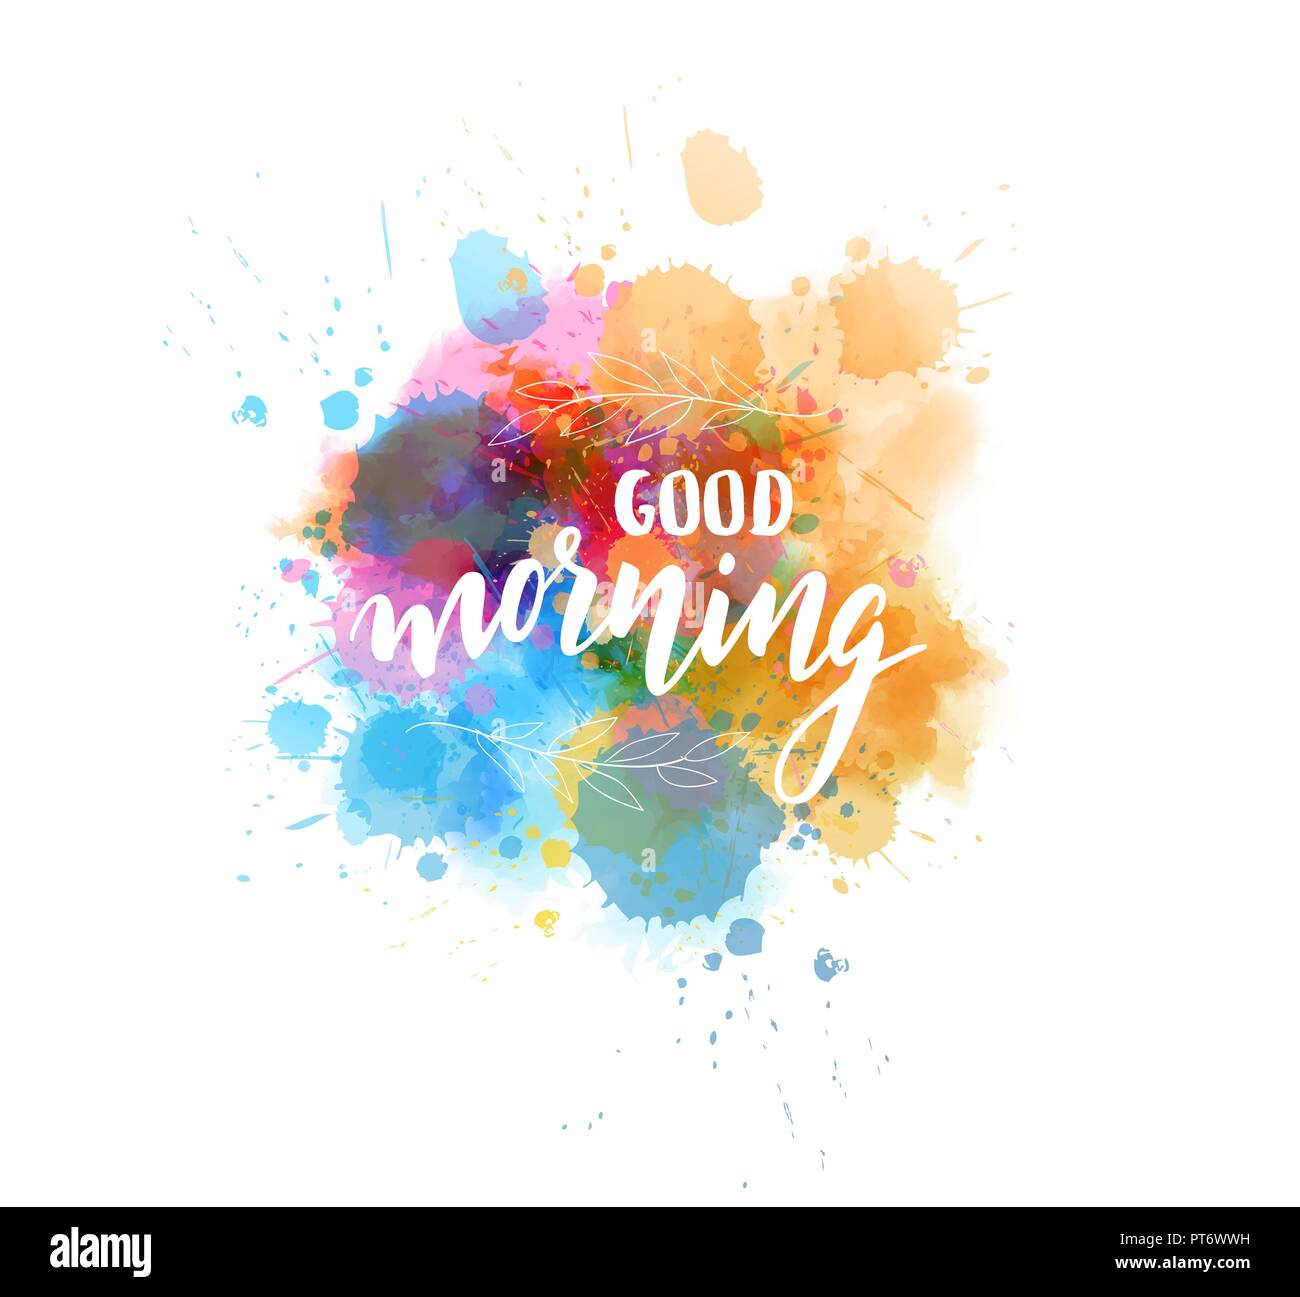 Good morning hand lettering phrase on watercolor imitation color ...